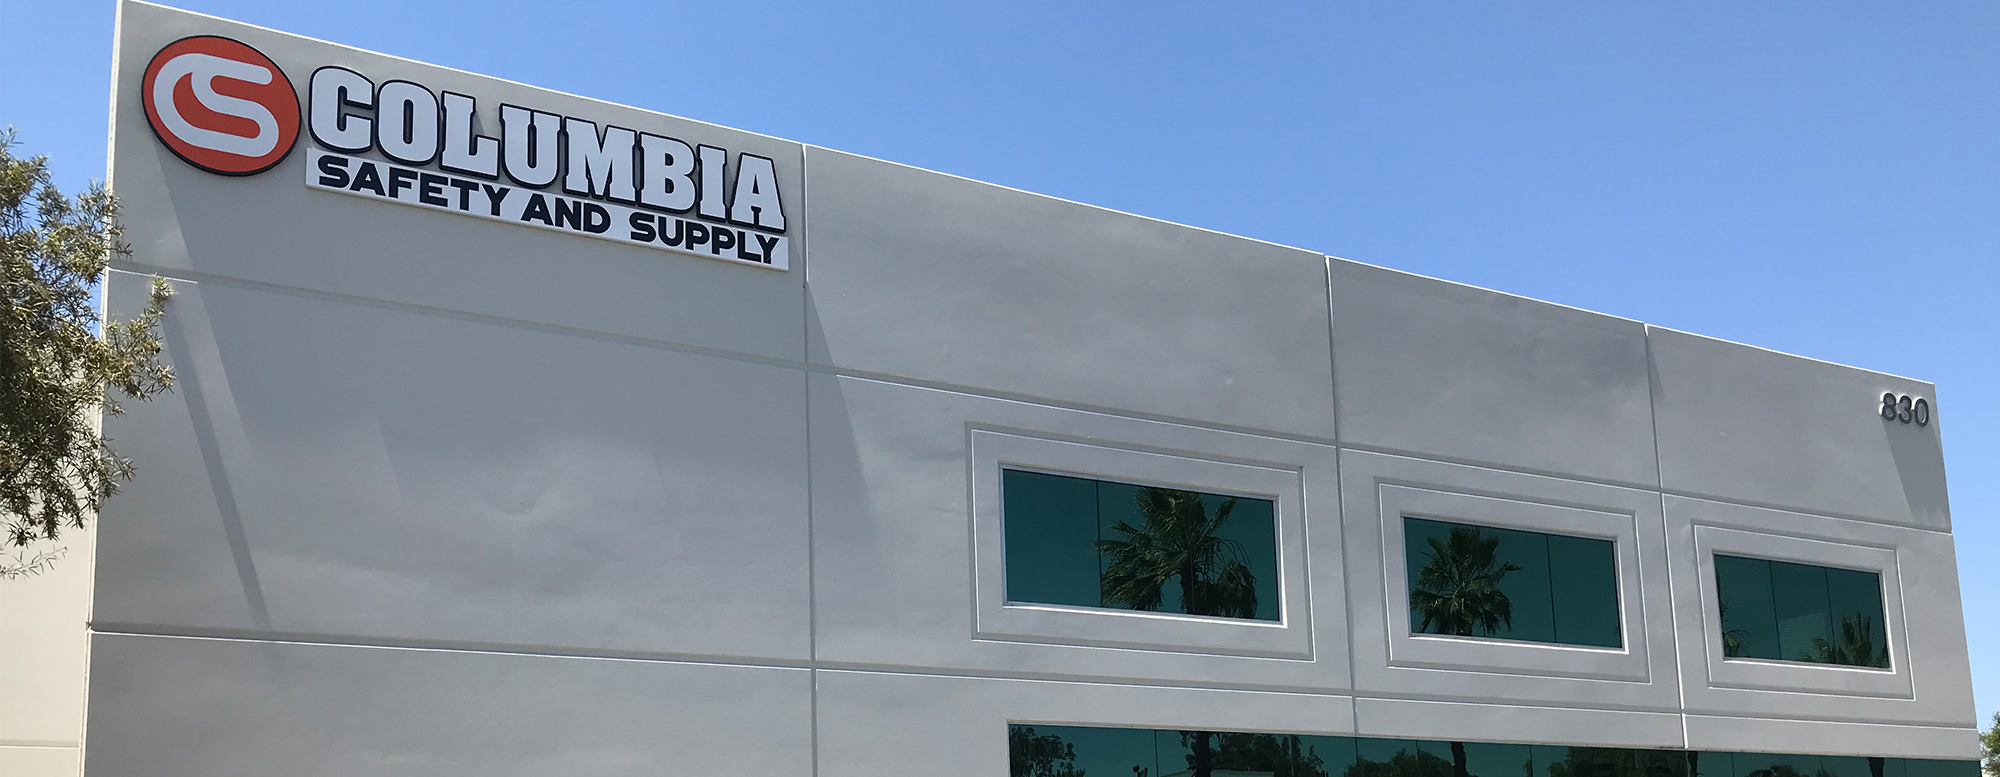 Columbia Safety and Supply's Storefront & Distribution Center located in Corona (Los Angeles), CA